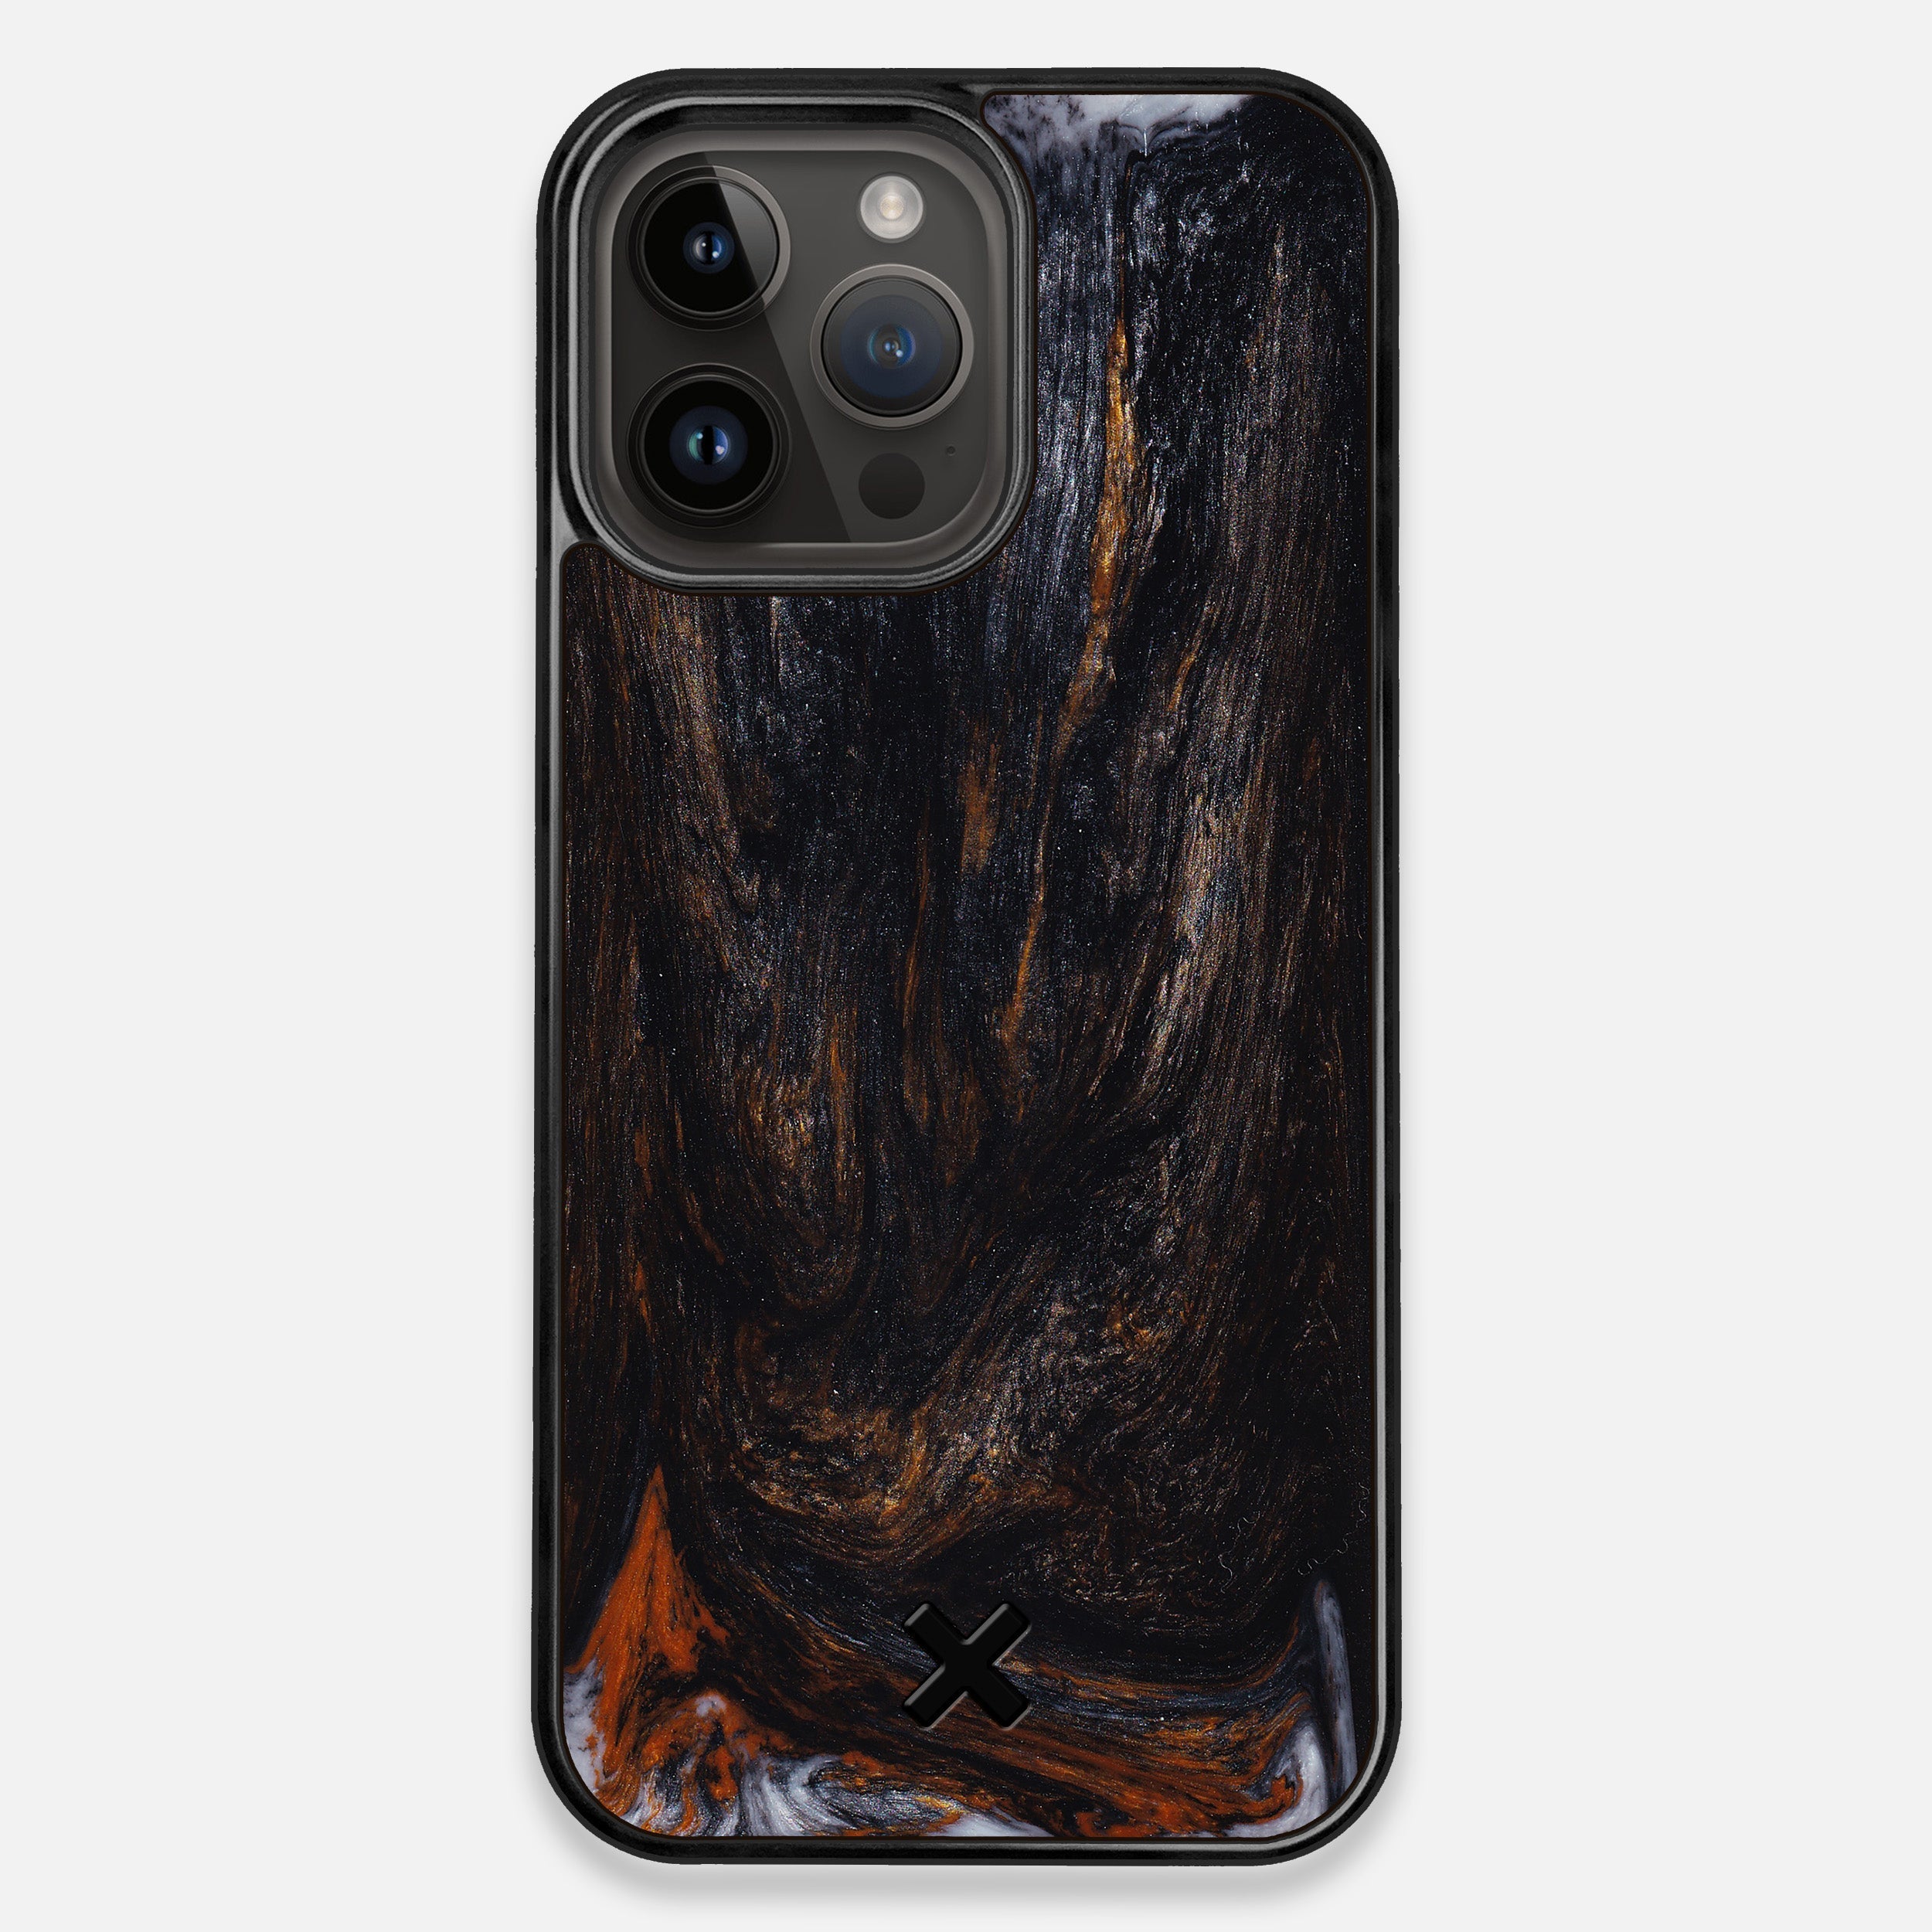 One & Only - Wood and Resin Case - #01744